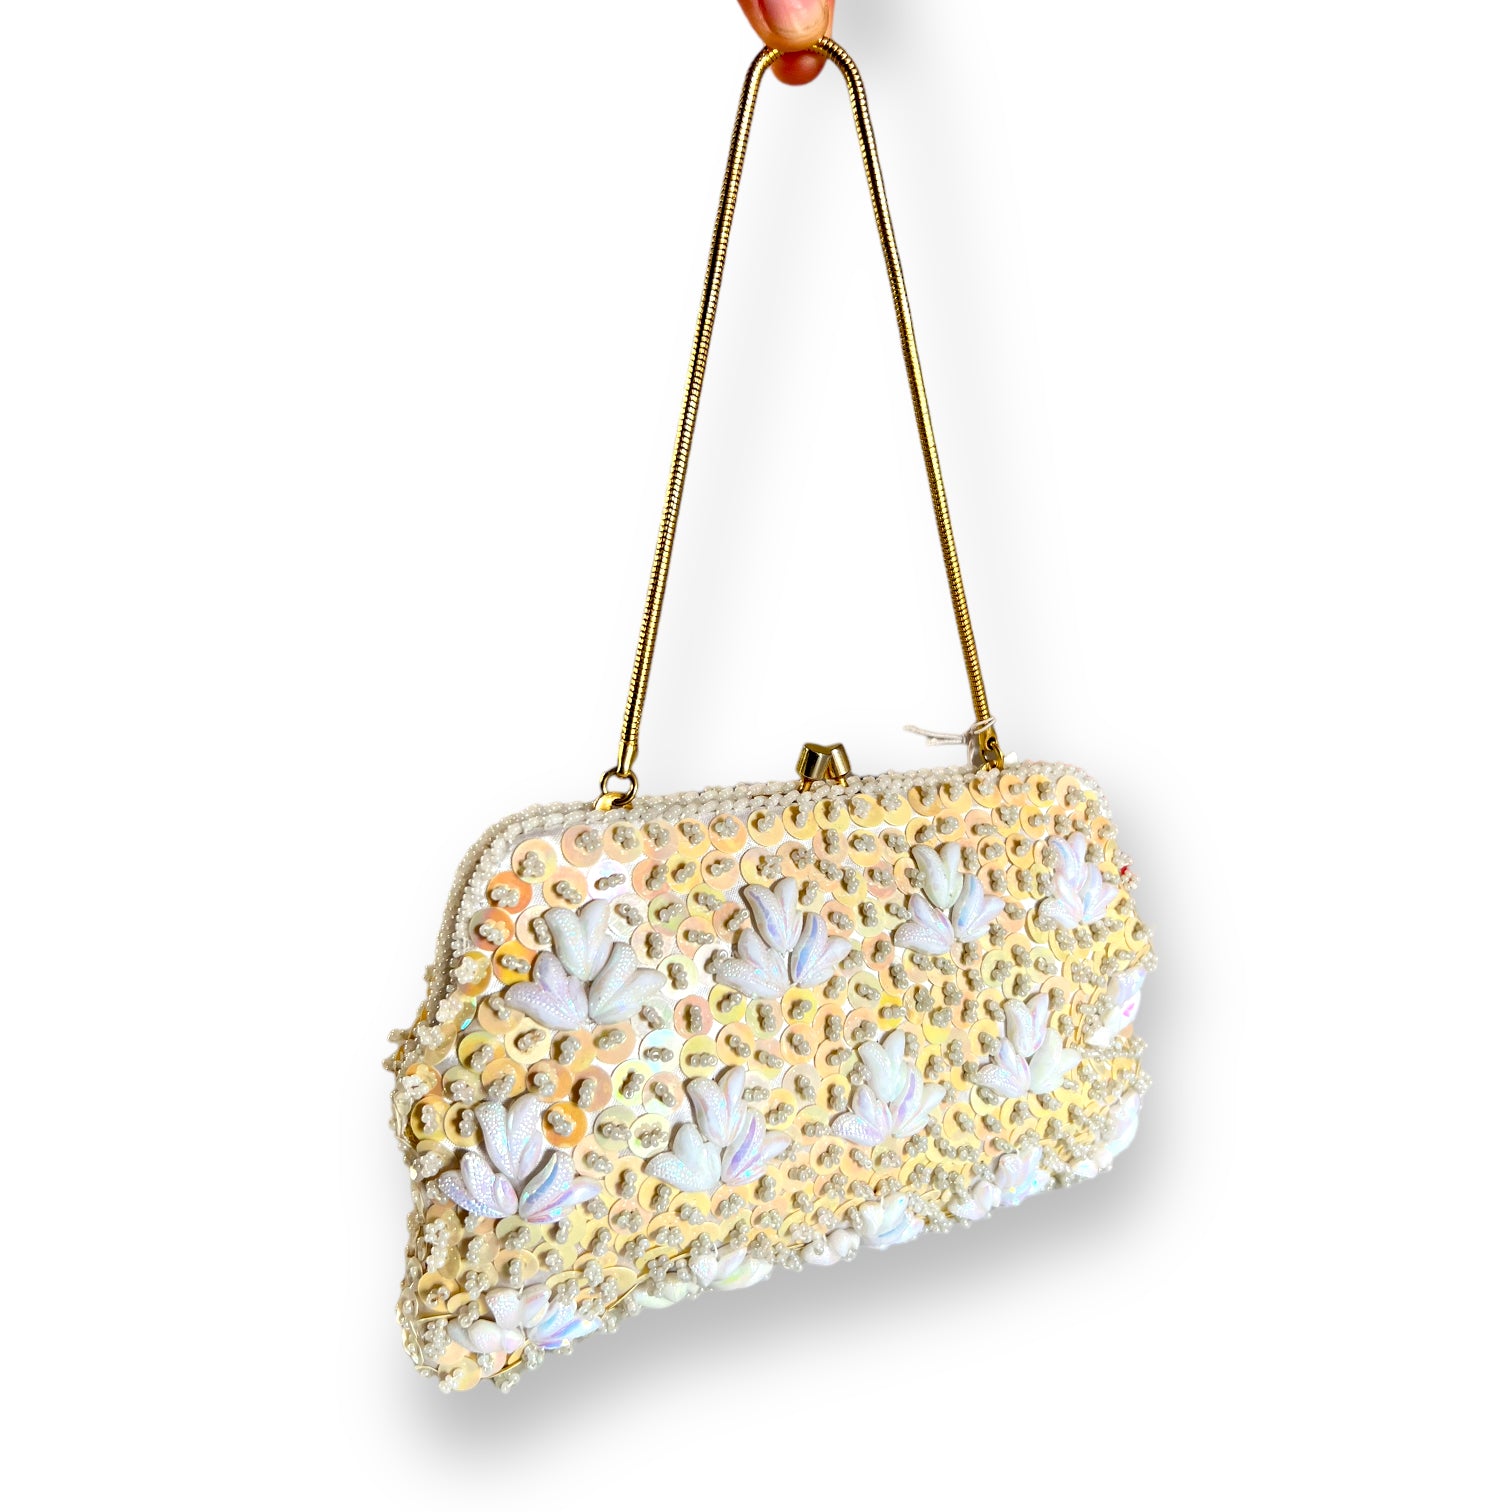 Chloé Vintage Sequin and Leather Baguette - Gold Shoulder Bags, Handbags -  CHL217630 | The RealReal